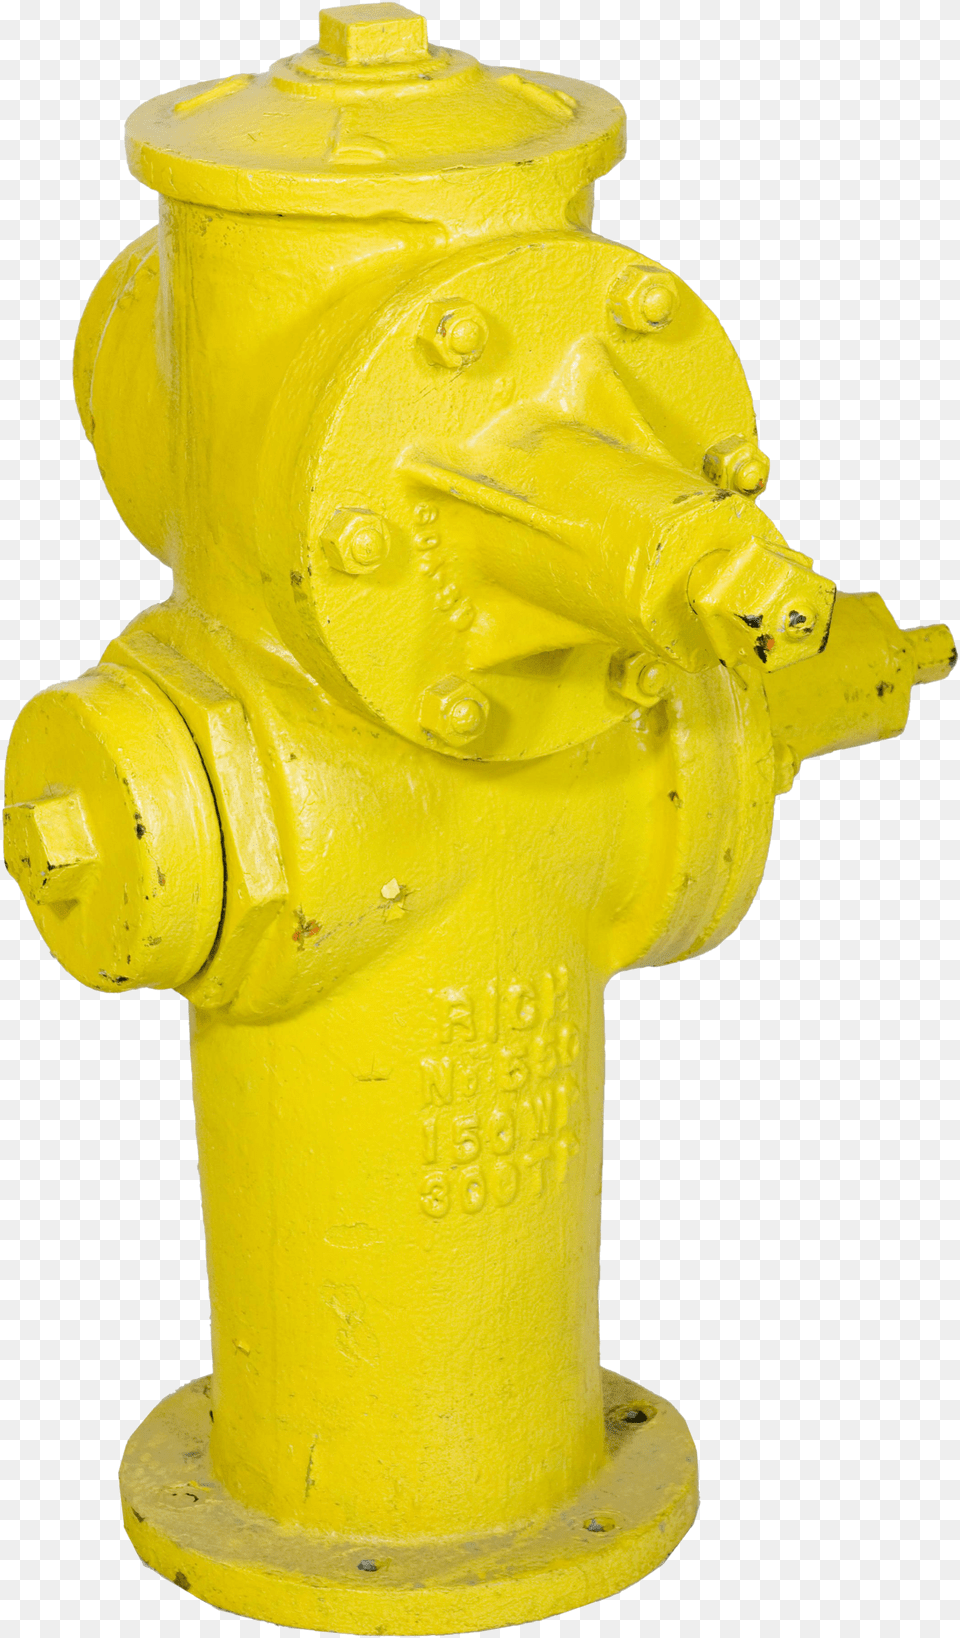 Fire Hydrant Clipart Background Yellow Fire Hydrant Clipart Free Png Download